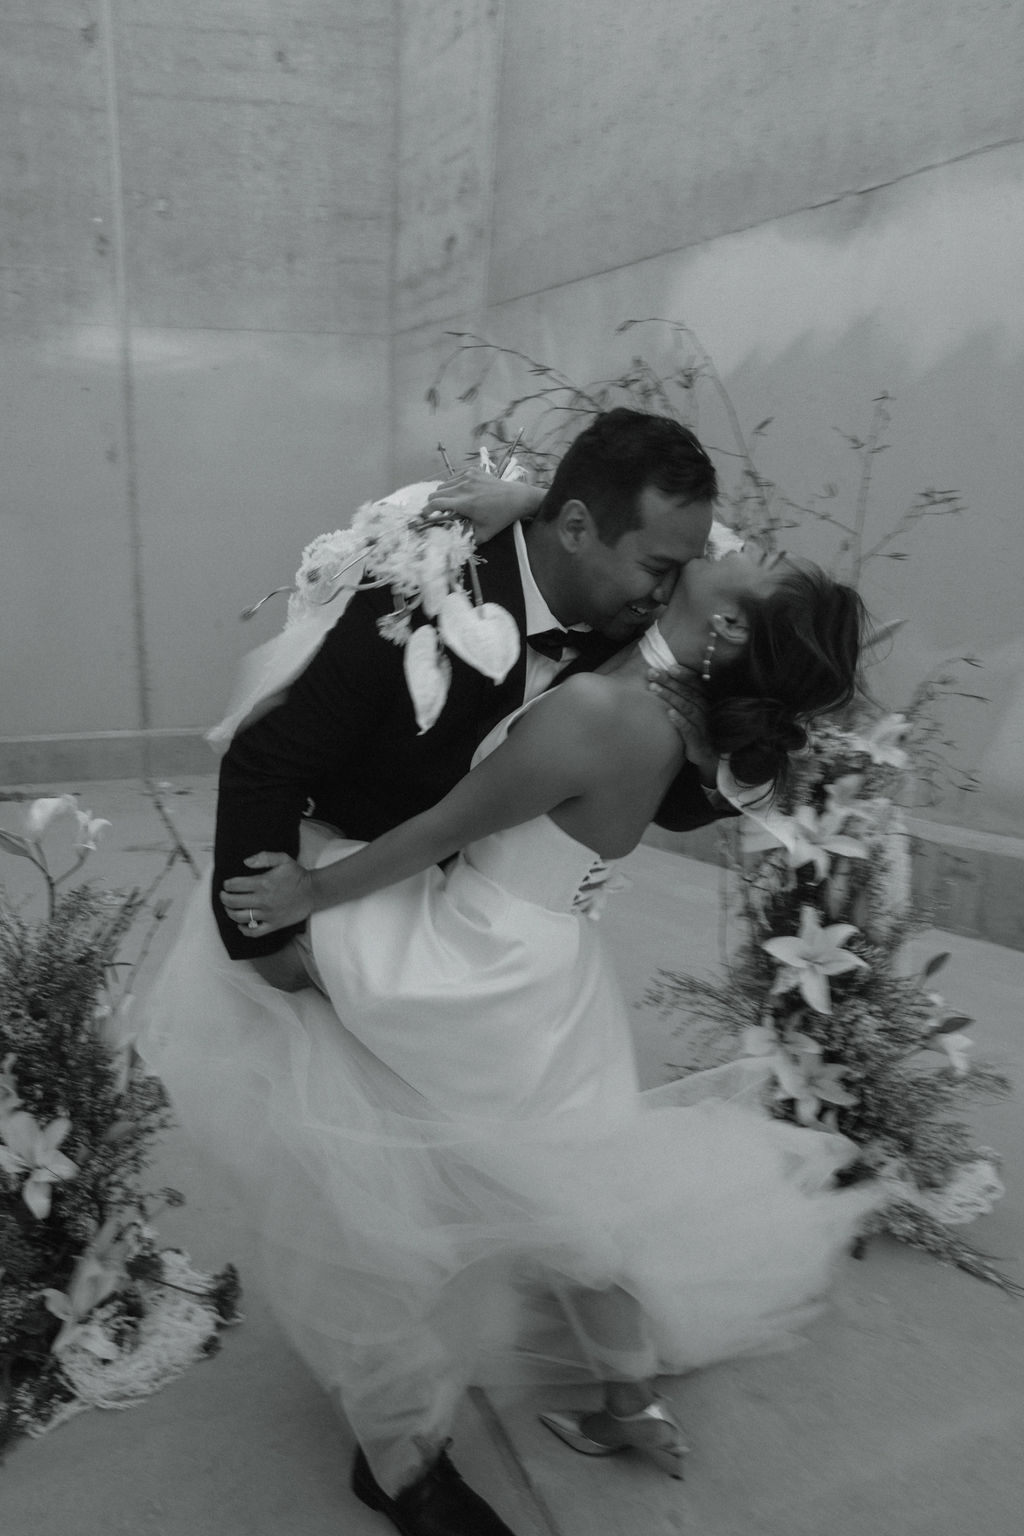 A bride and groom share a kiss in a minimalist concrete corridor, surrounded by large floral arrangements at their intimate wedding